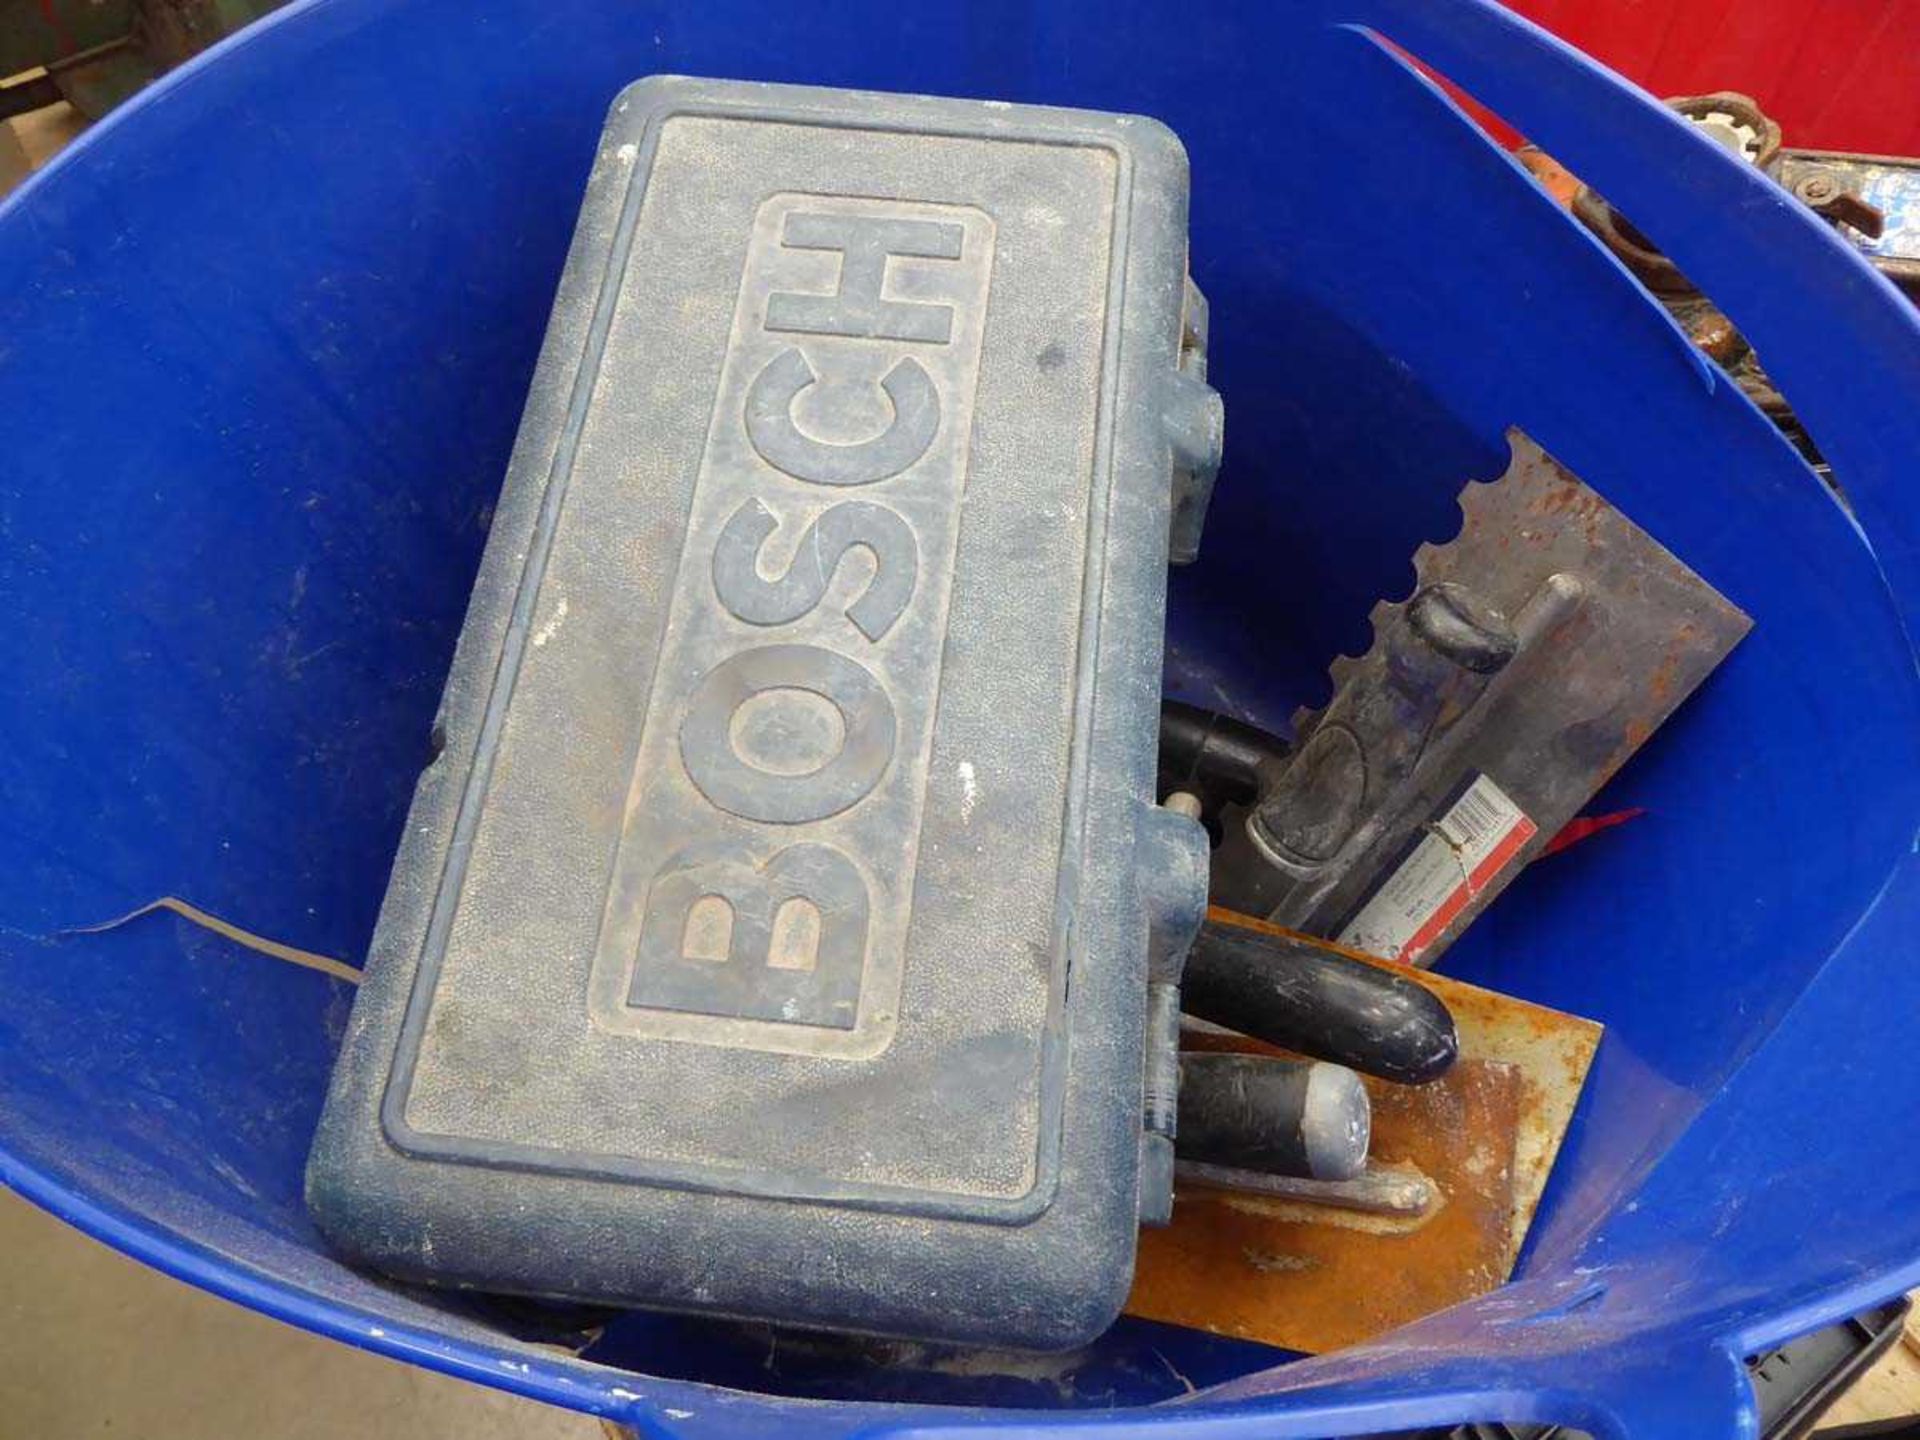 Red bucket containing Bosch 110V angle grinder, plaster tools and hammer